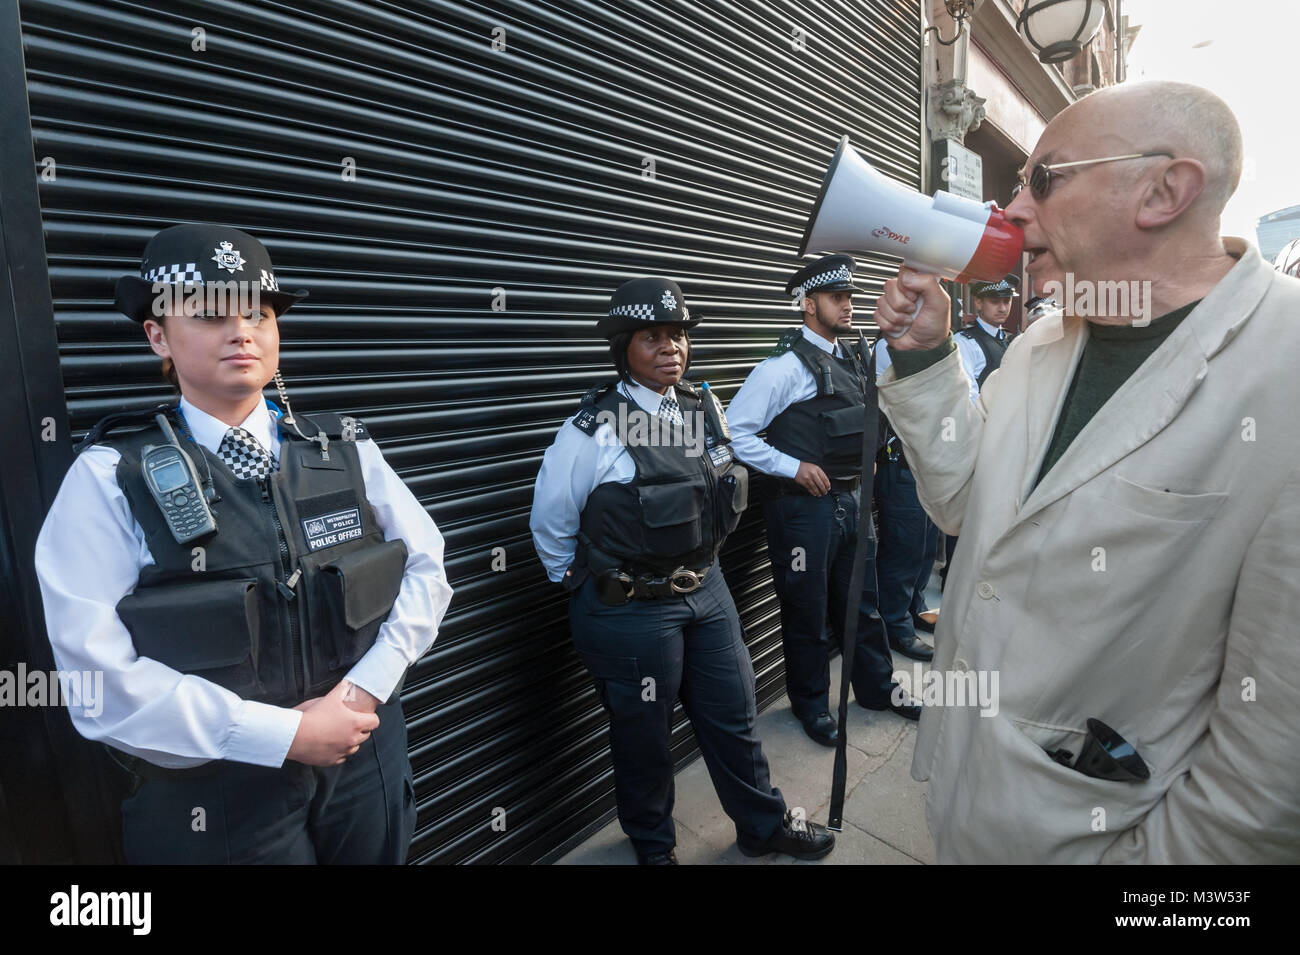 Ian Bone of Class War speaks asking the police if they would defend a museum for murderers of police officers in the same way as they are defending one about a man who committed gruesome murders of women. Stock Photo